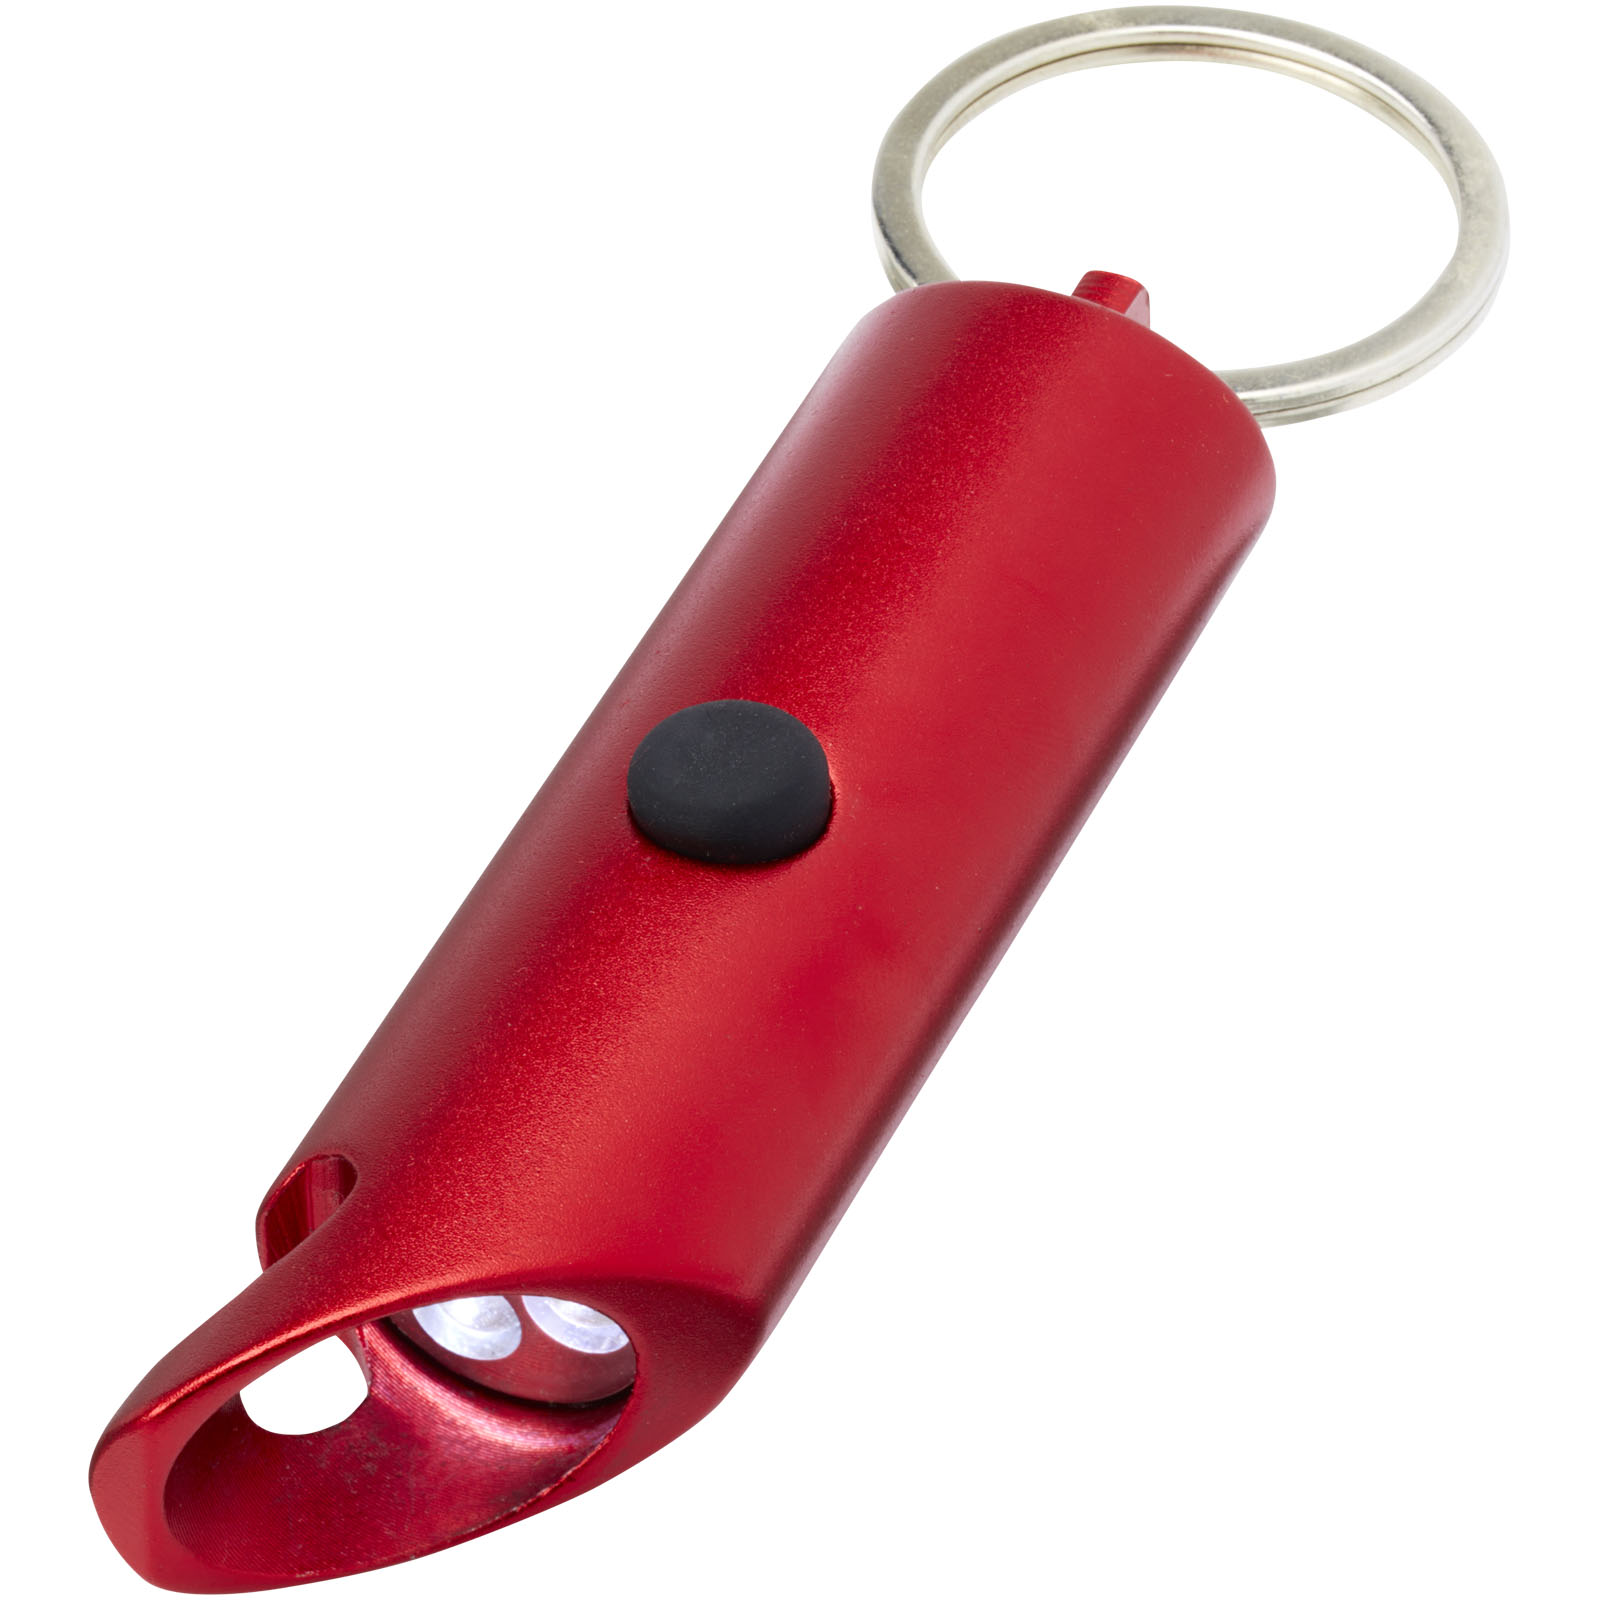 Lamps - Flare RCS recycled aluminium IPX LED light and bottle opener with keychain